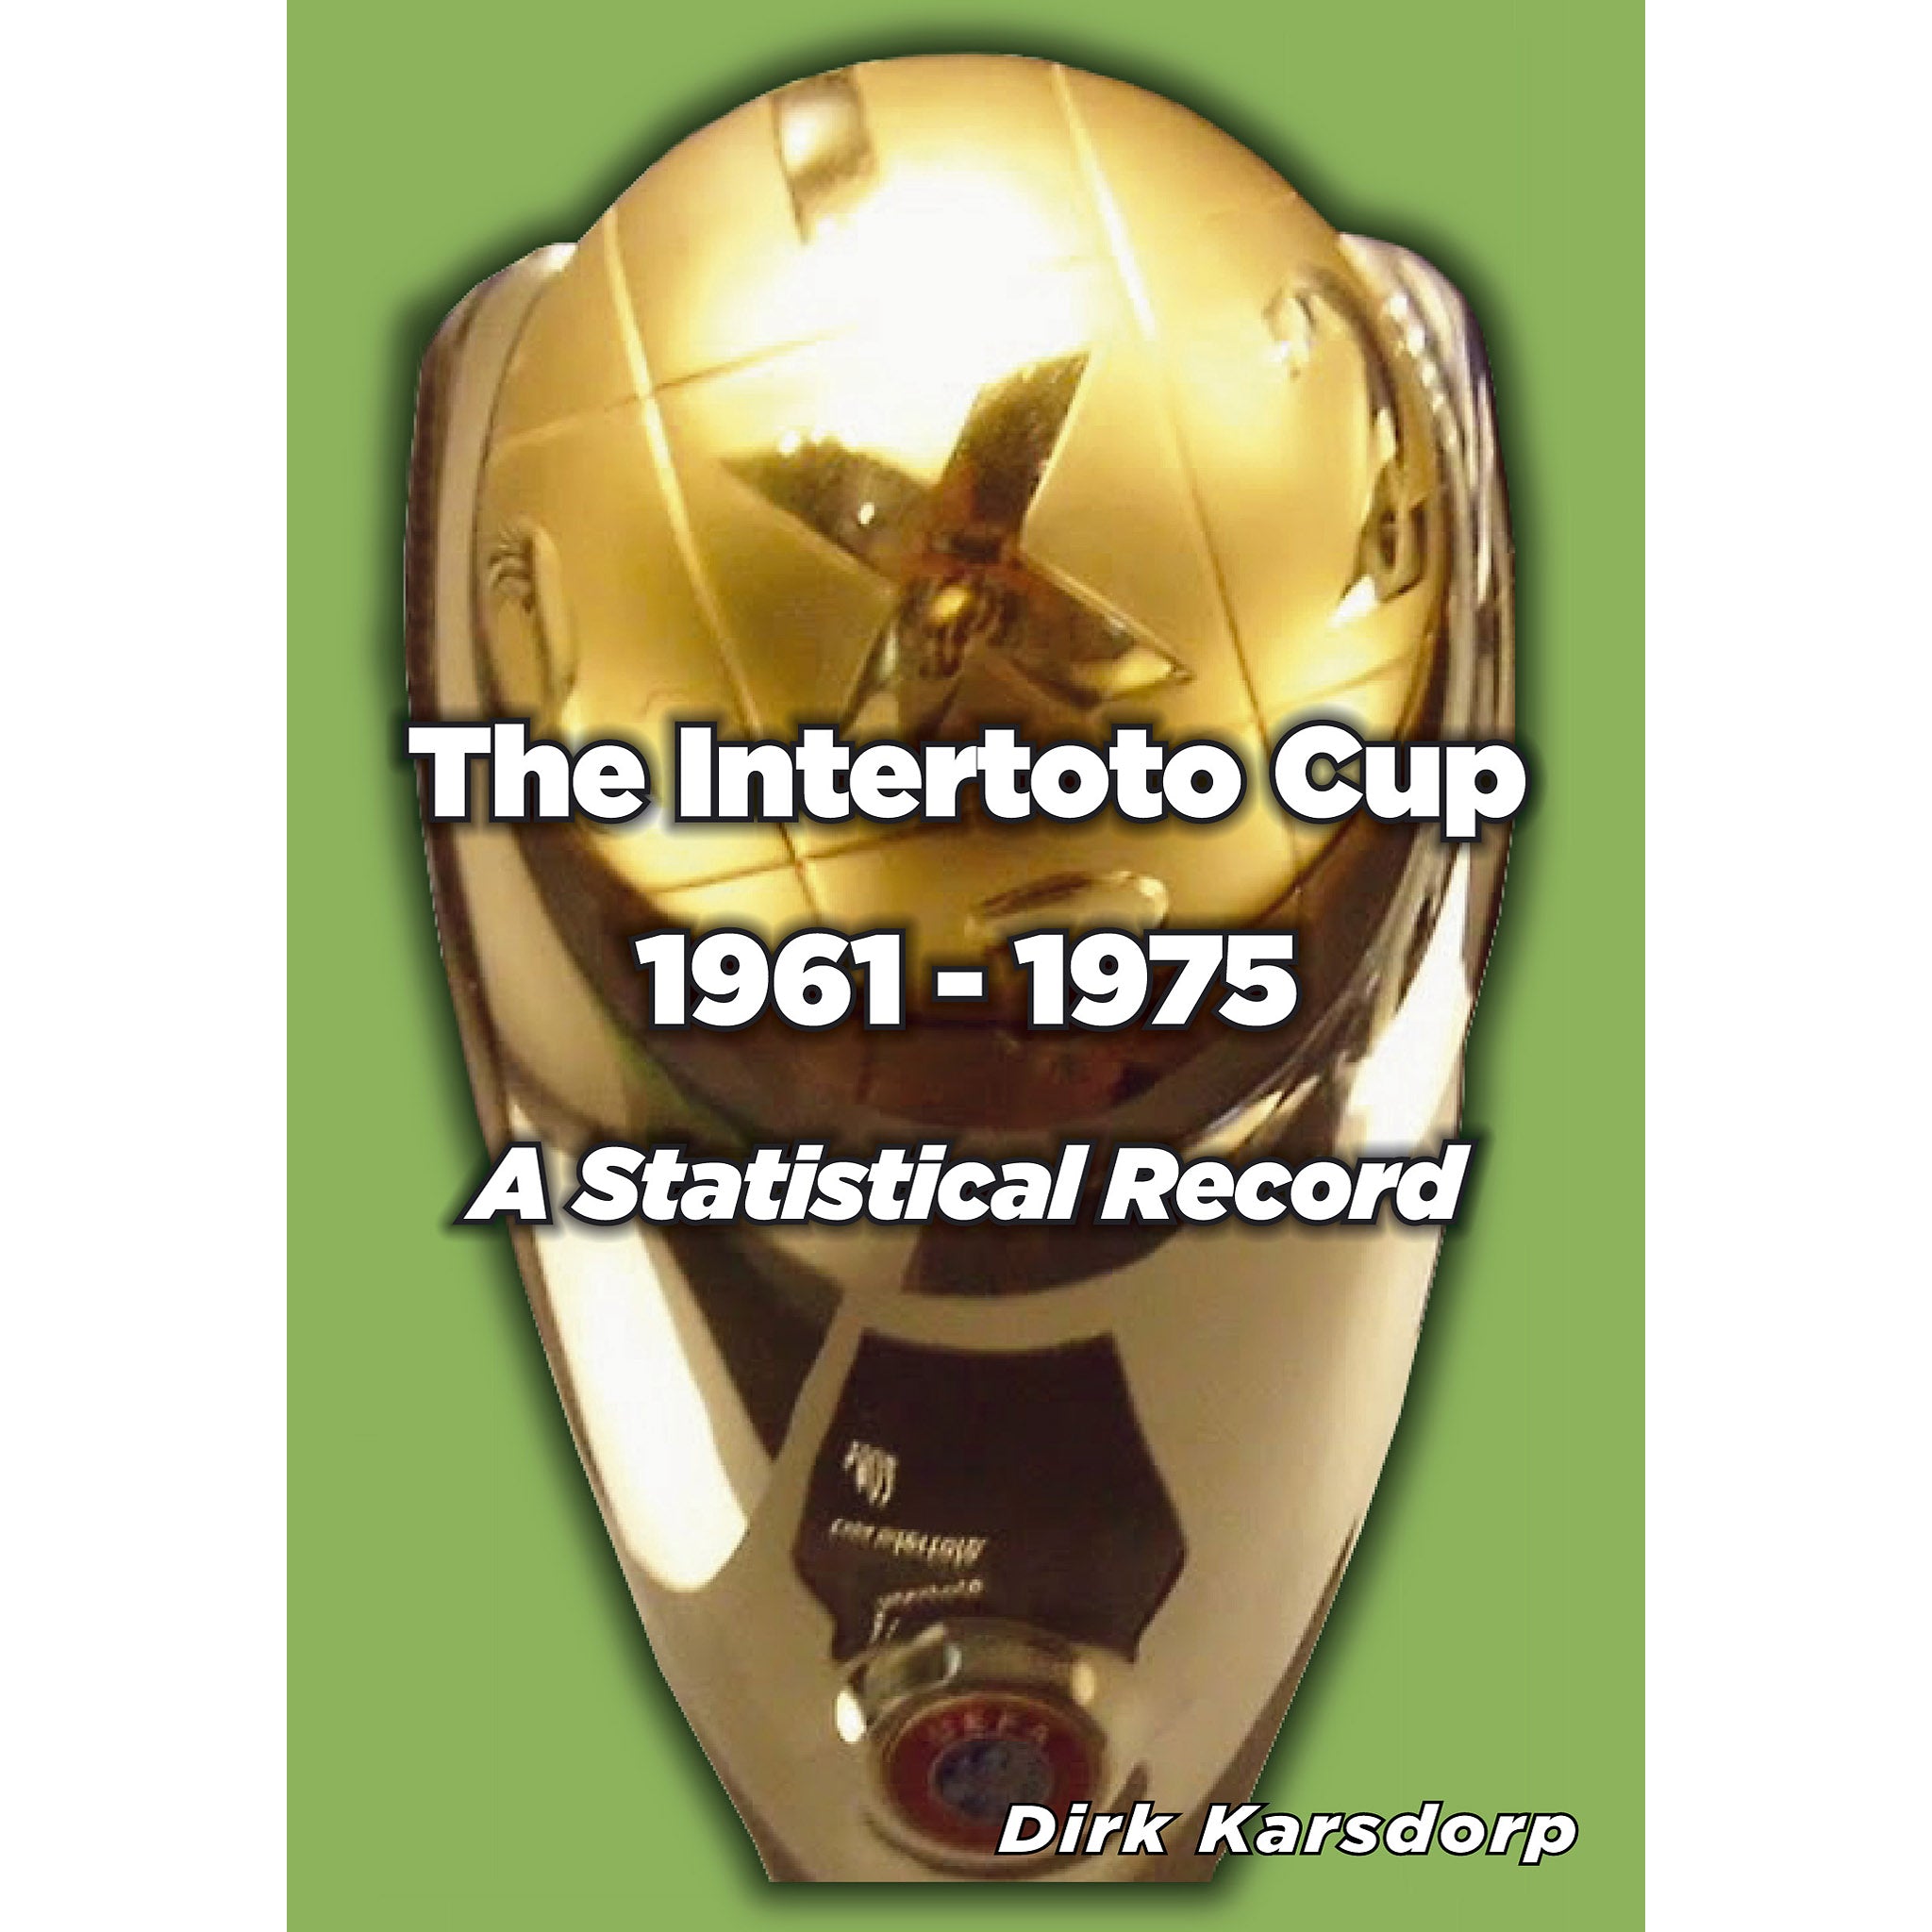 The Intertoto Cup – A Statistical Record 1961-1975